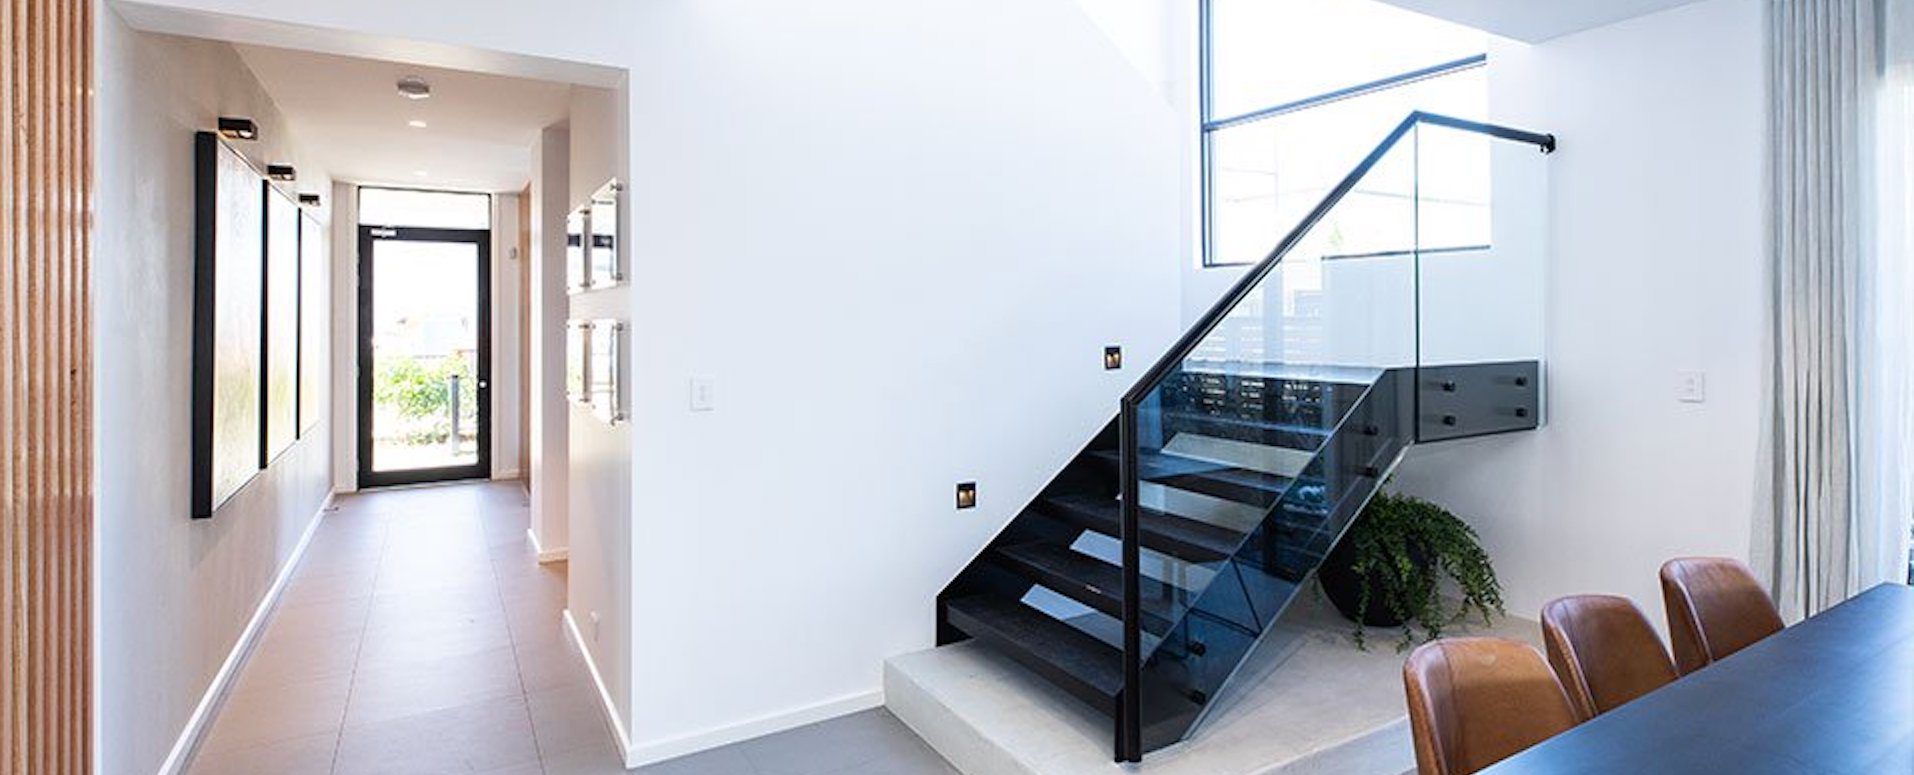 Black steel stairs with glass balustrade and matching black steel l handrail leads into a dining space with a long hallway to the front door.